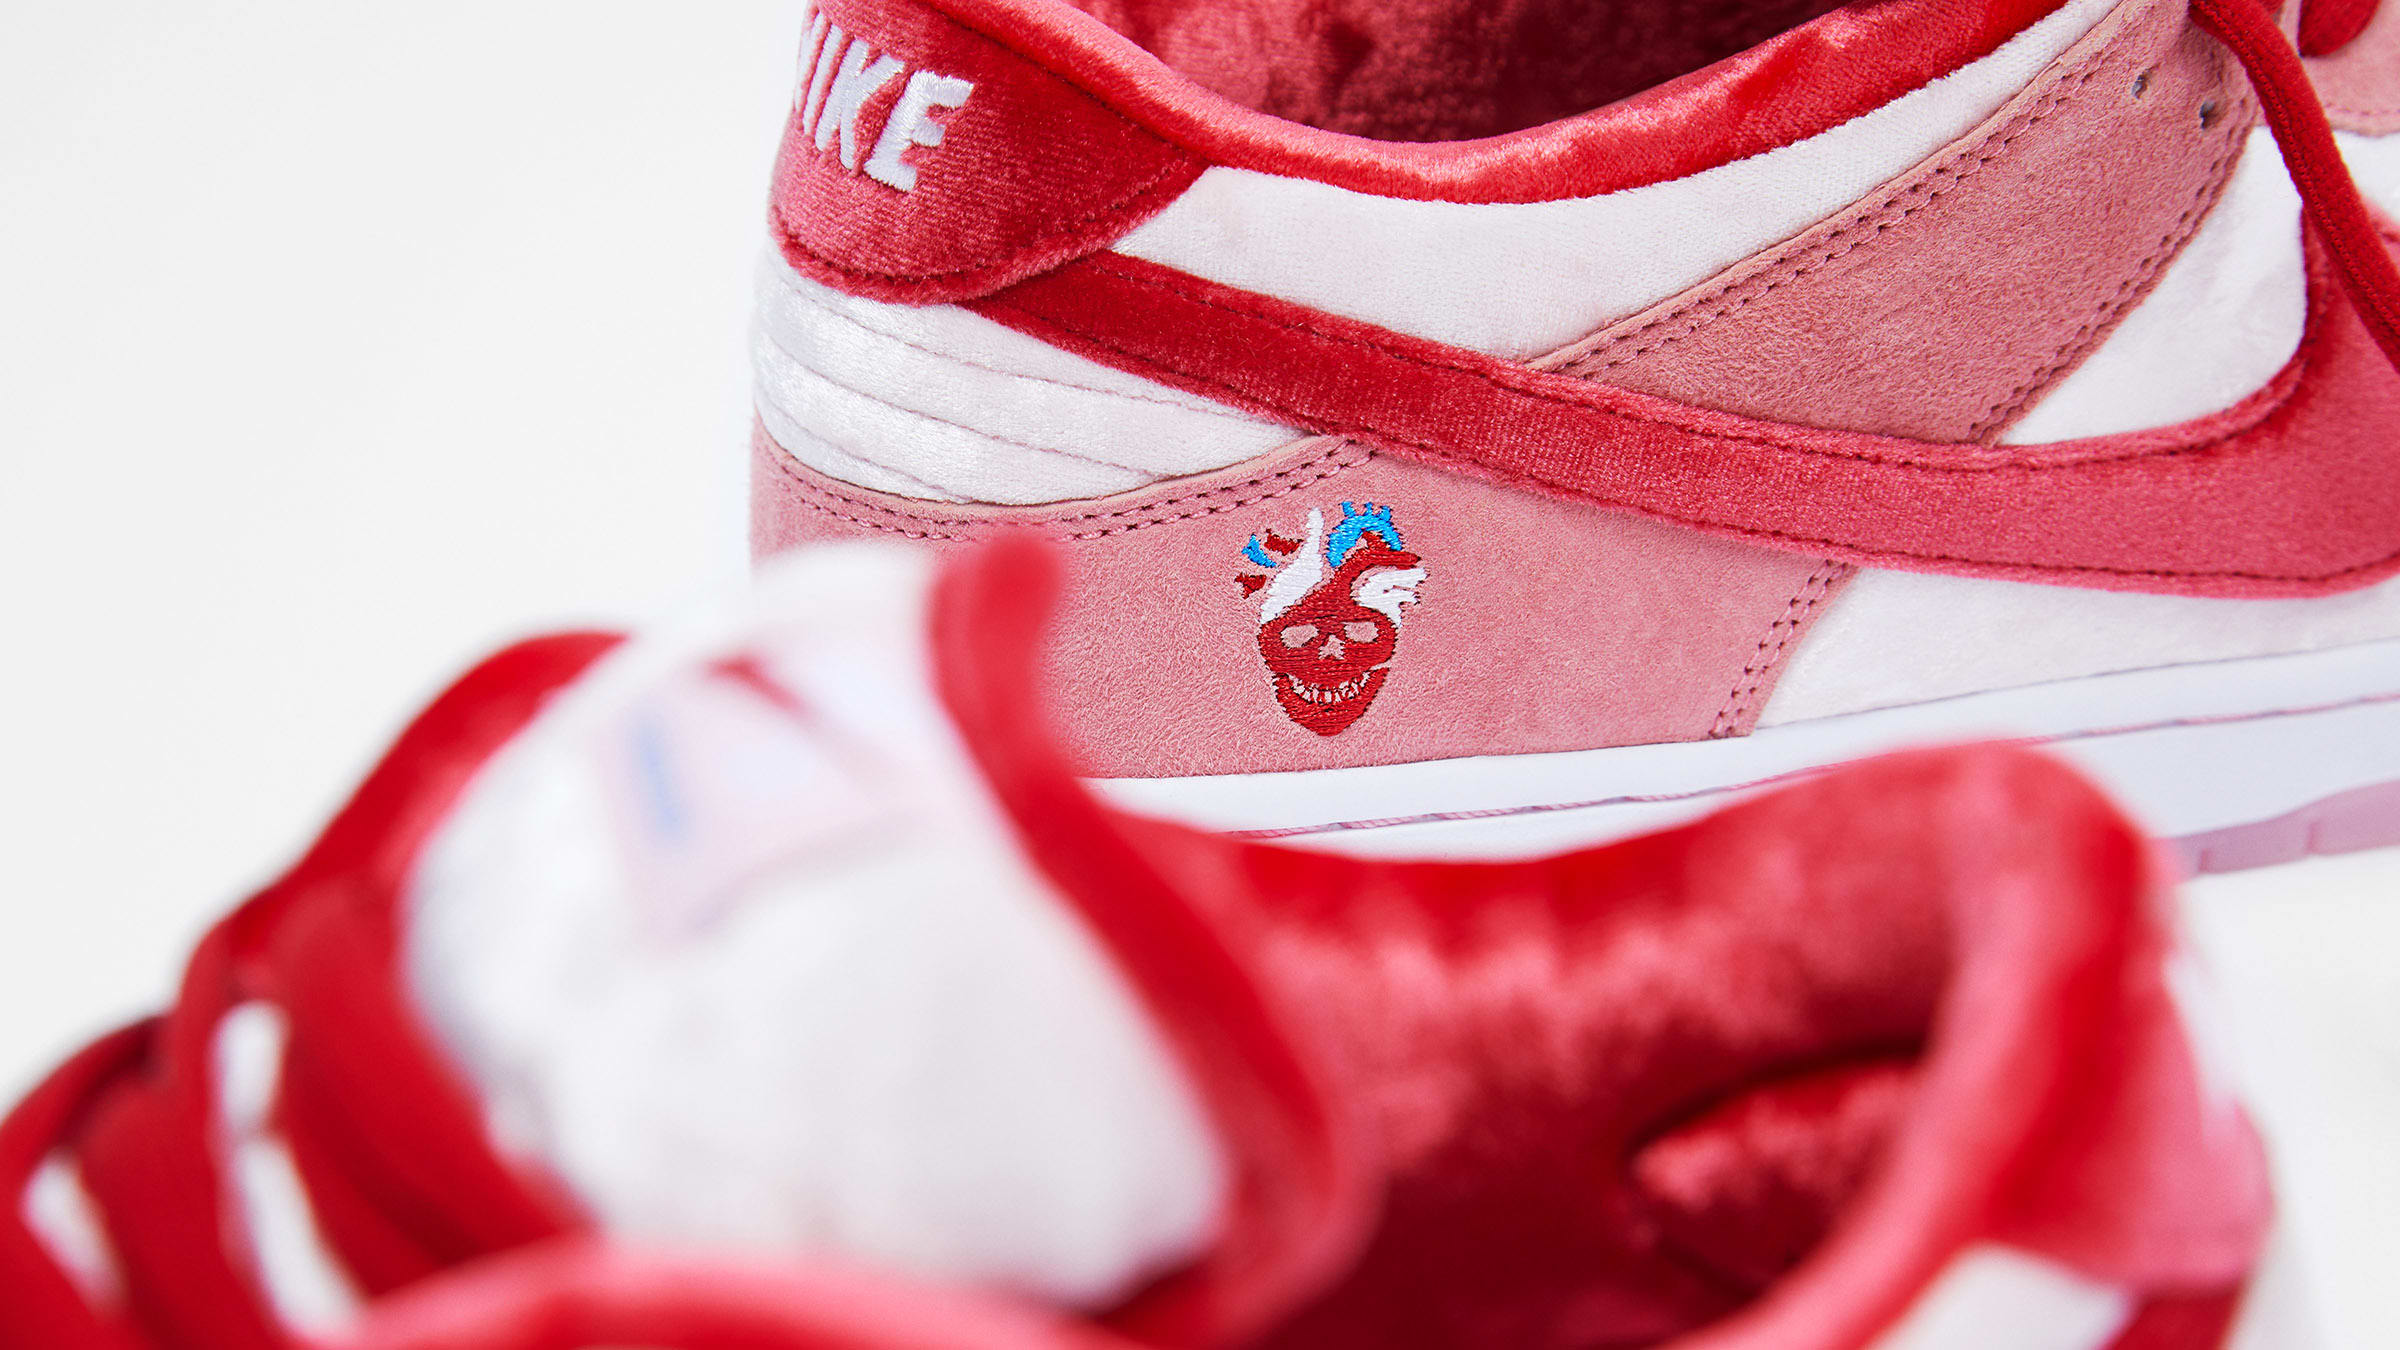 Nike SB x Strangelove Dunk Low Pro (Bright Melon & Gym Red) | END. Launches